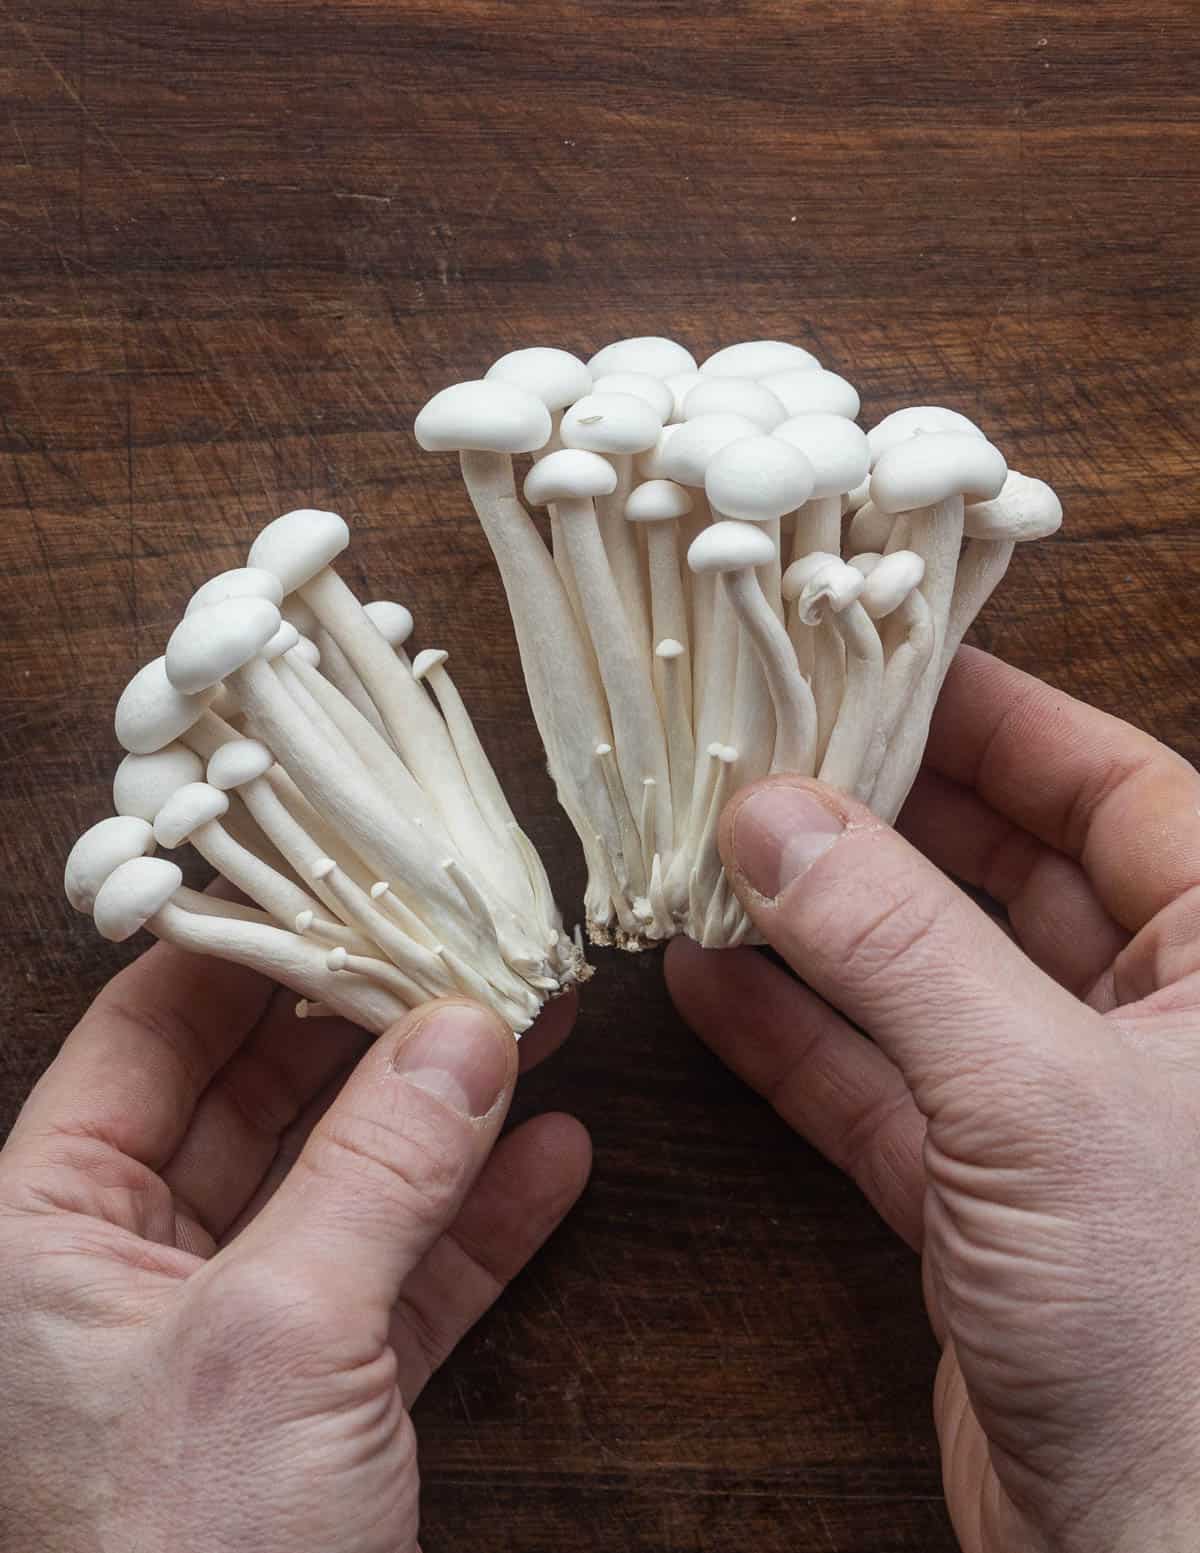 Breaking apart white beech mushrooms after removing from a clamshell. 